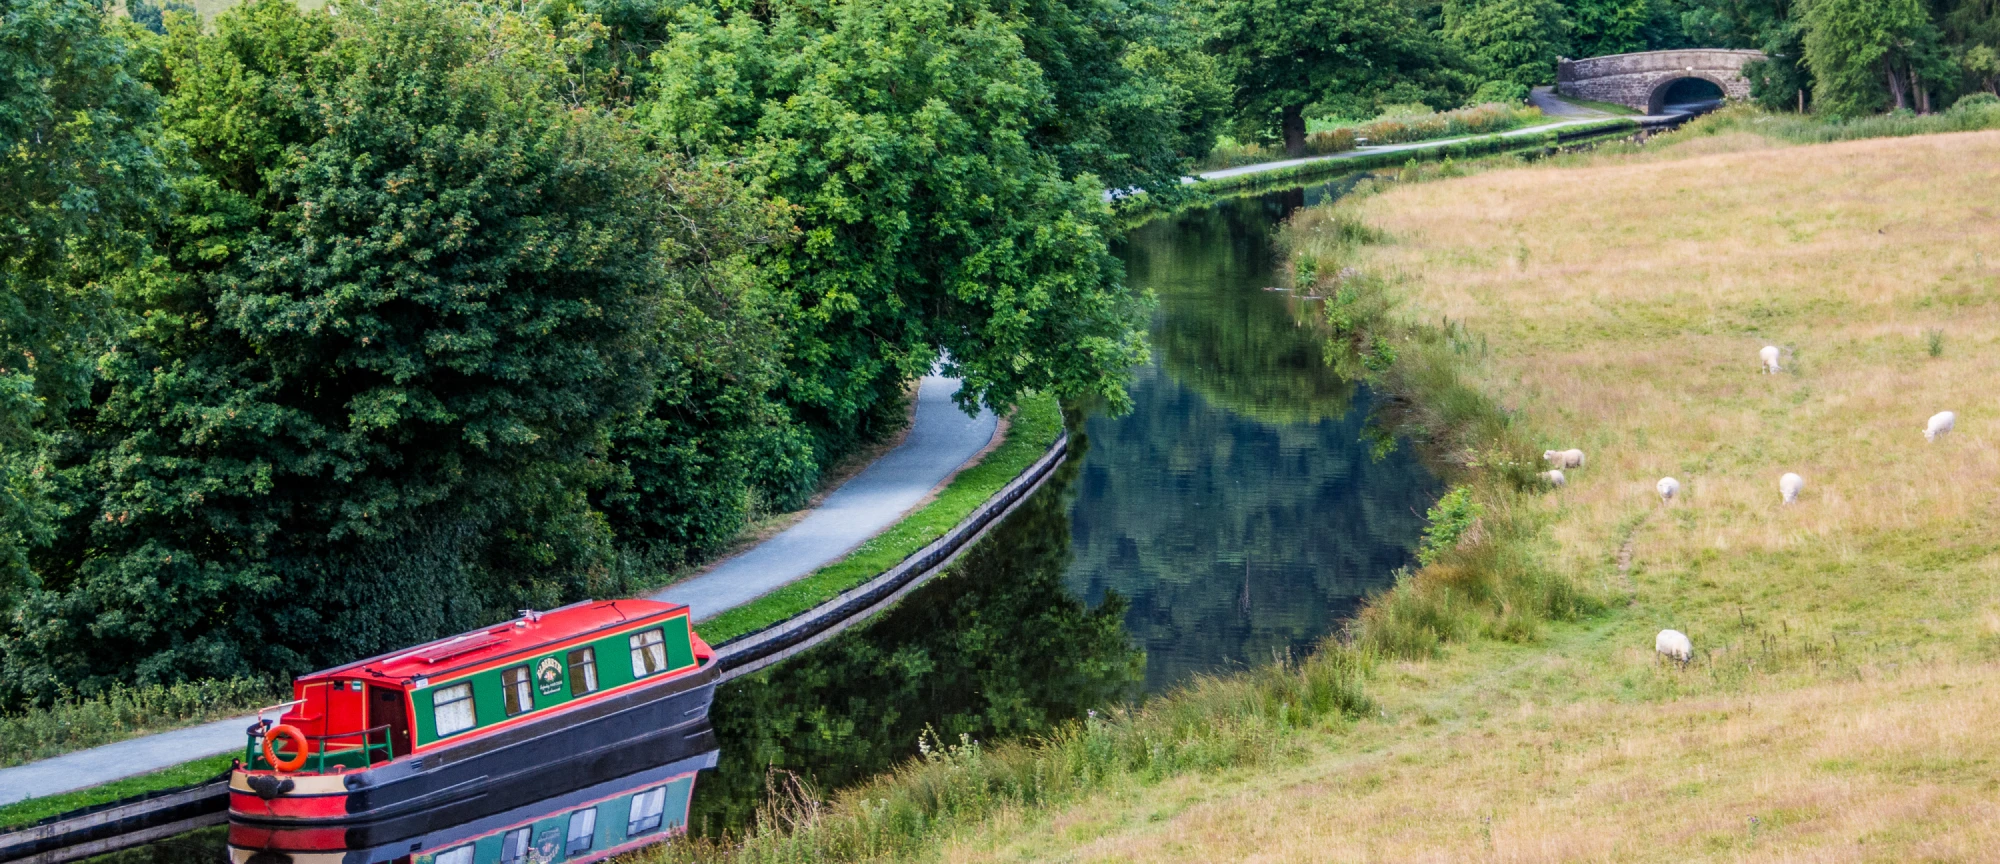 Holiday narrowboat moored up on the Lllangollen Canal